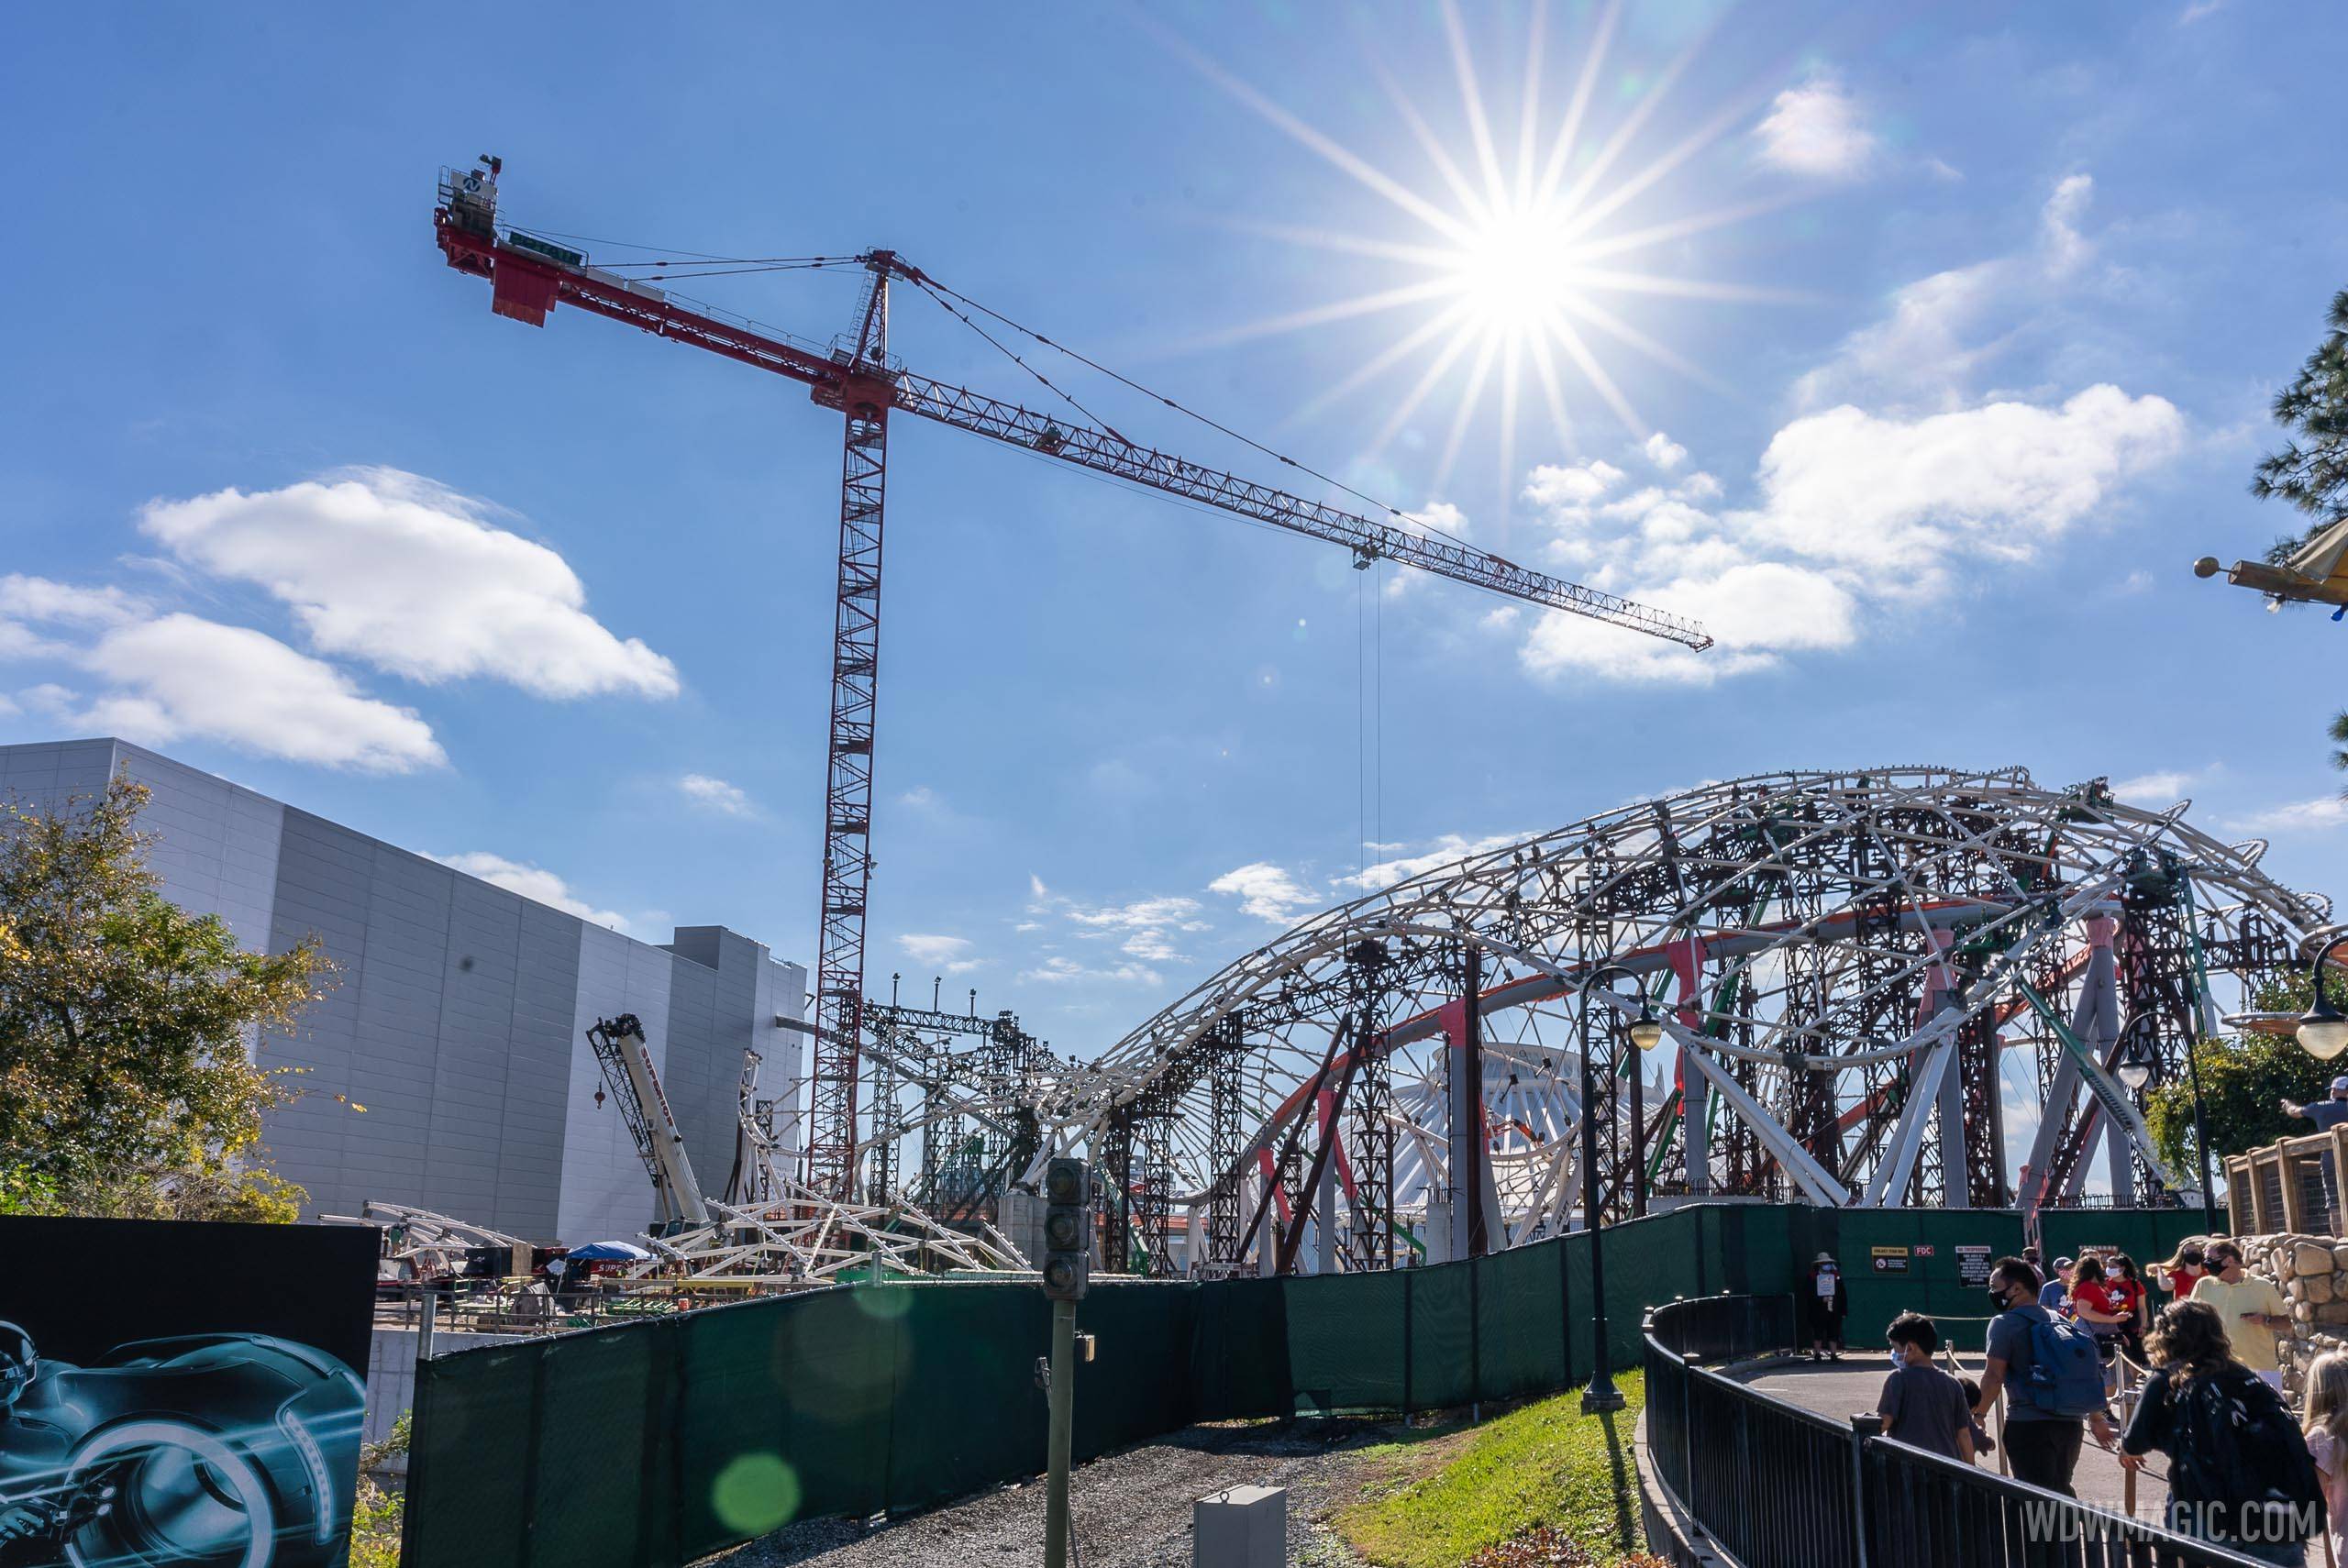 TRON's opening has been heavily delayed by COVID-19 shutdowns and an upcoming construction pause